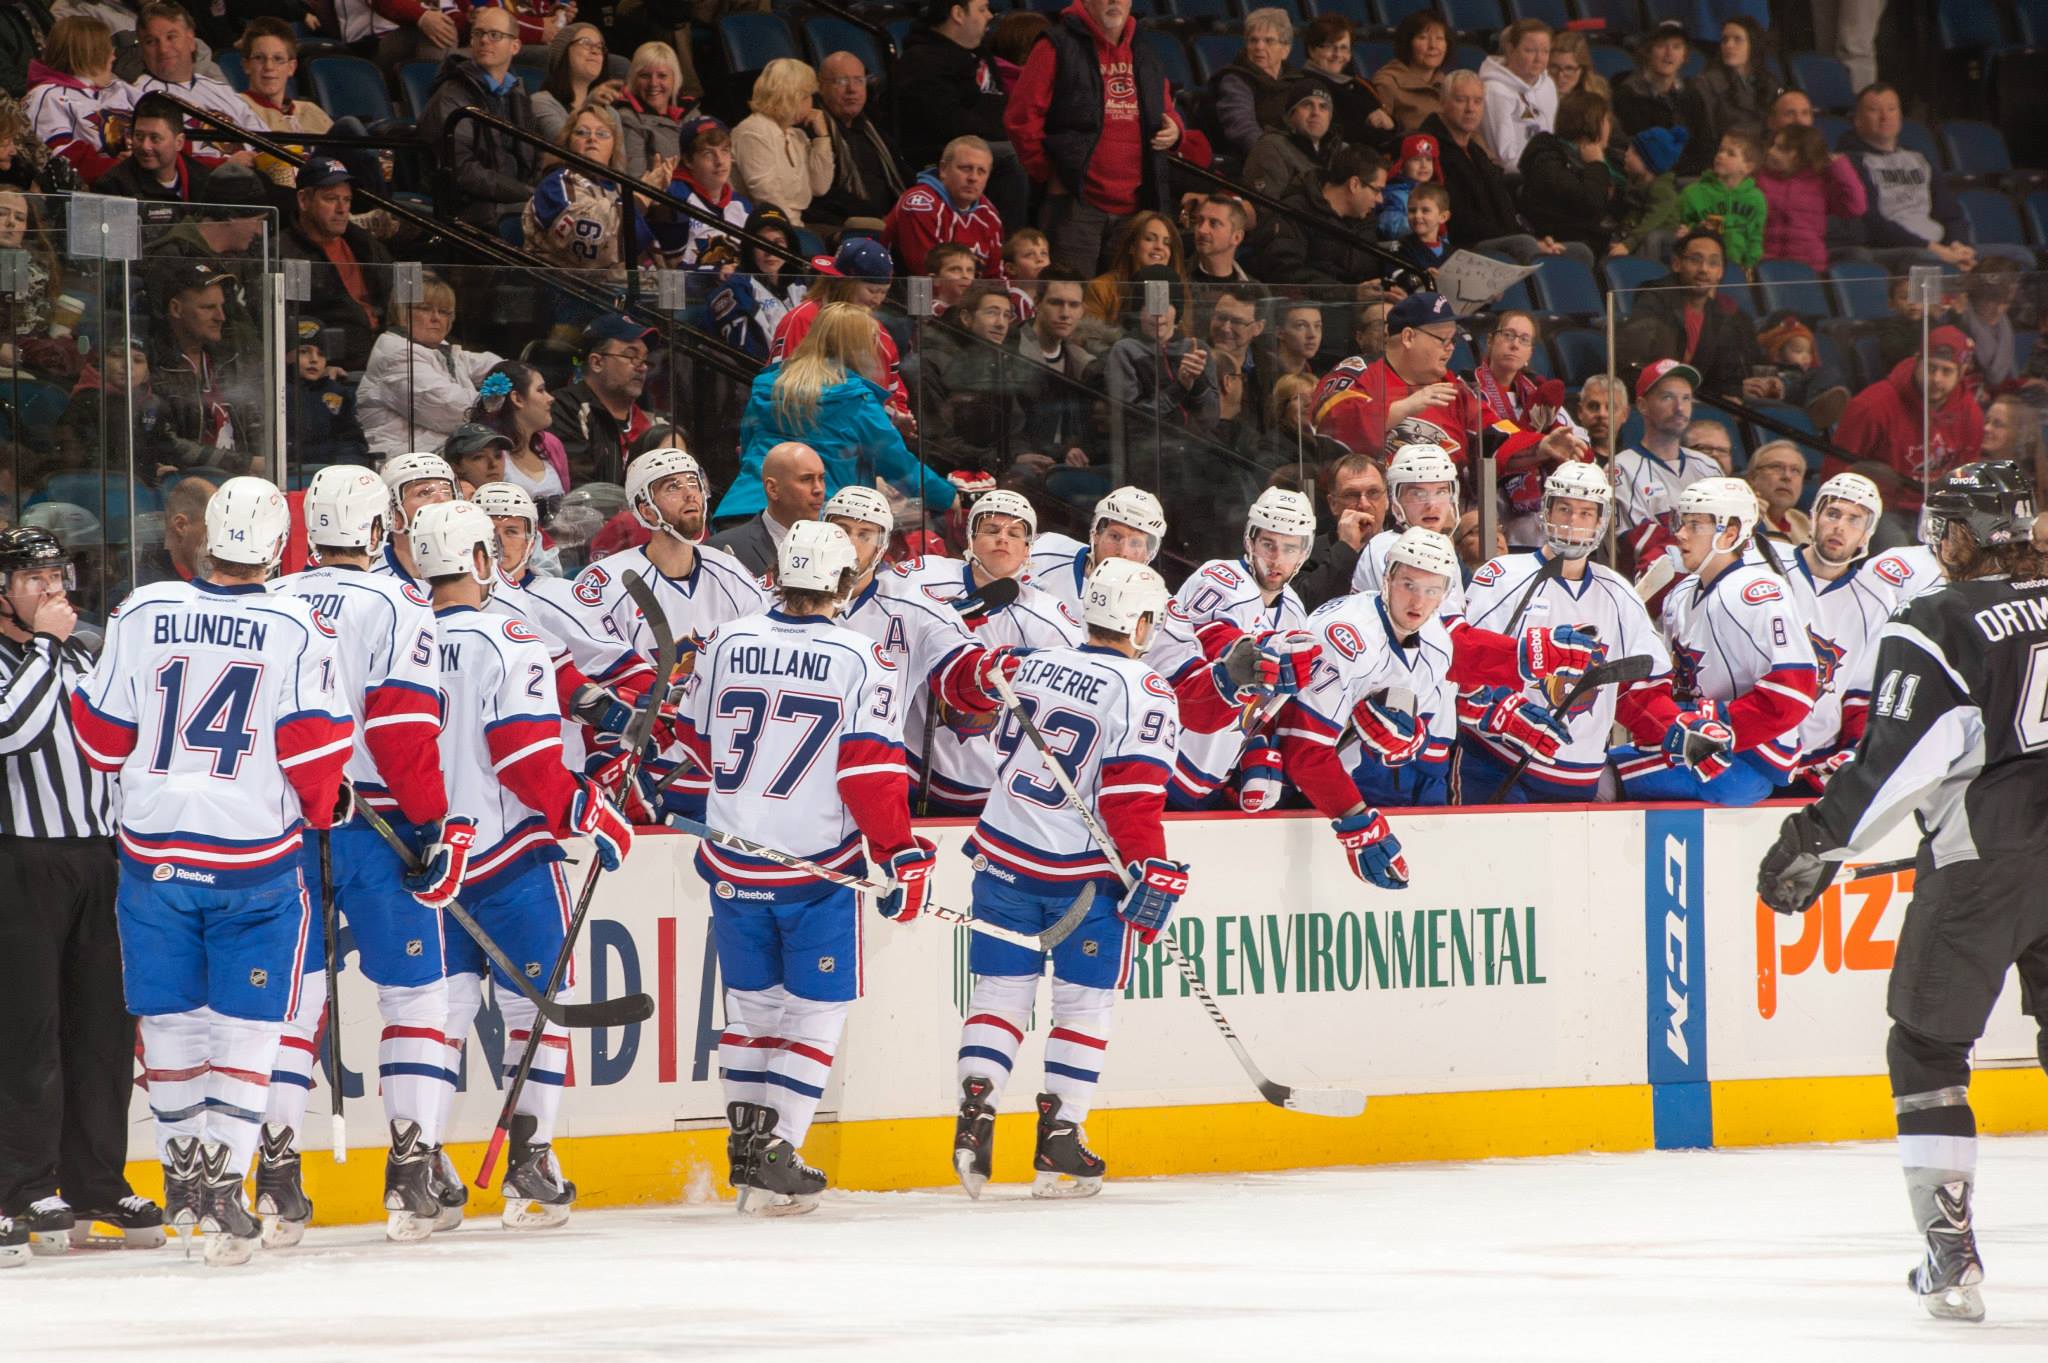 A First Look at Hamilton Bulldogs 2014-15 Lineup | AHL Report